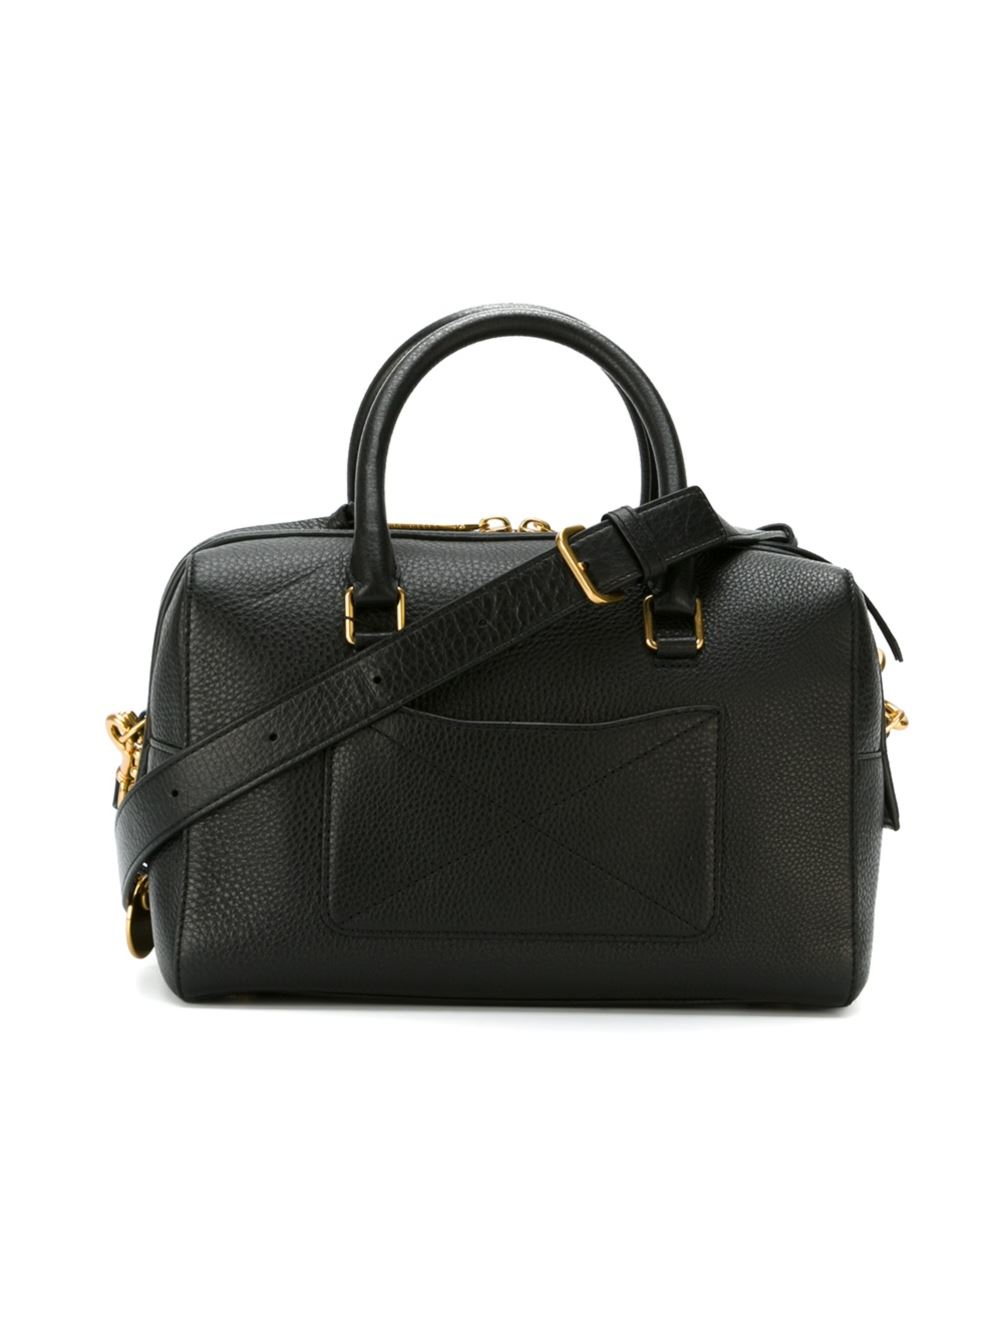 Marc Jacobs Leather Small 'recruit' Bauletto Tote in Black - Lyst